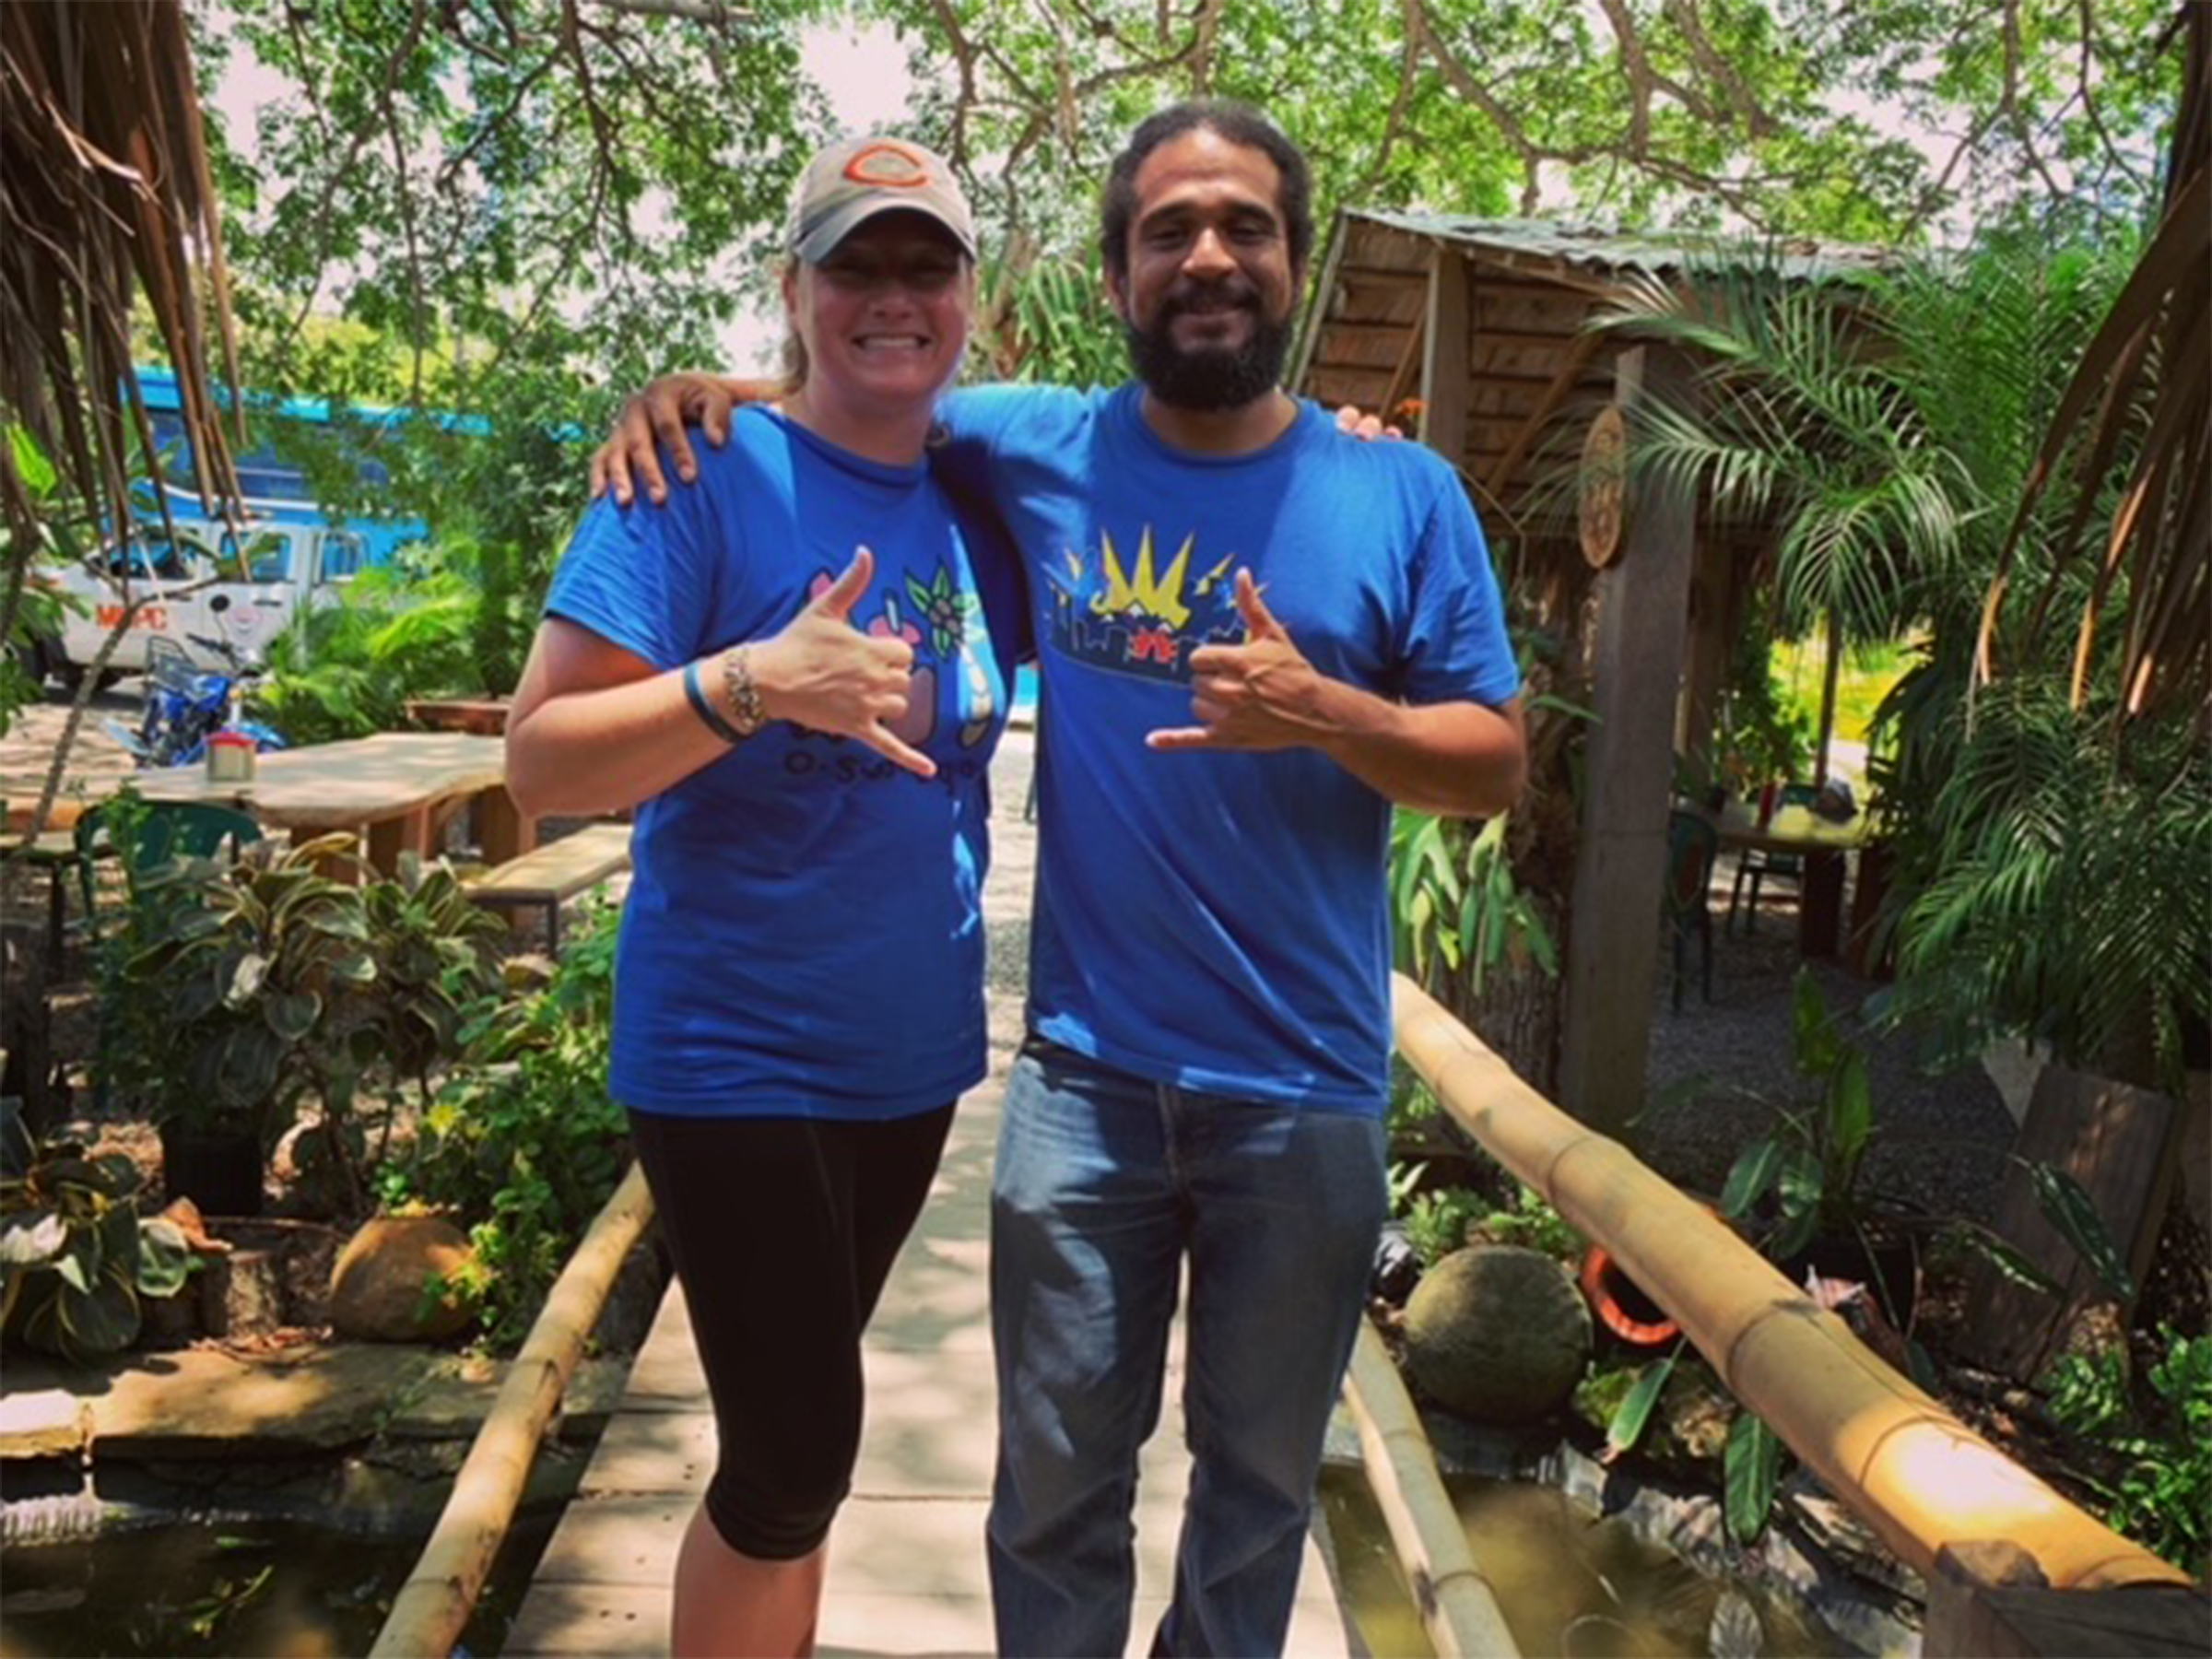 Heather smiles with D.R. local and EF partner, Héctor